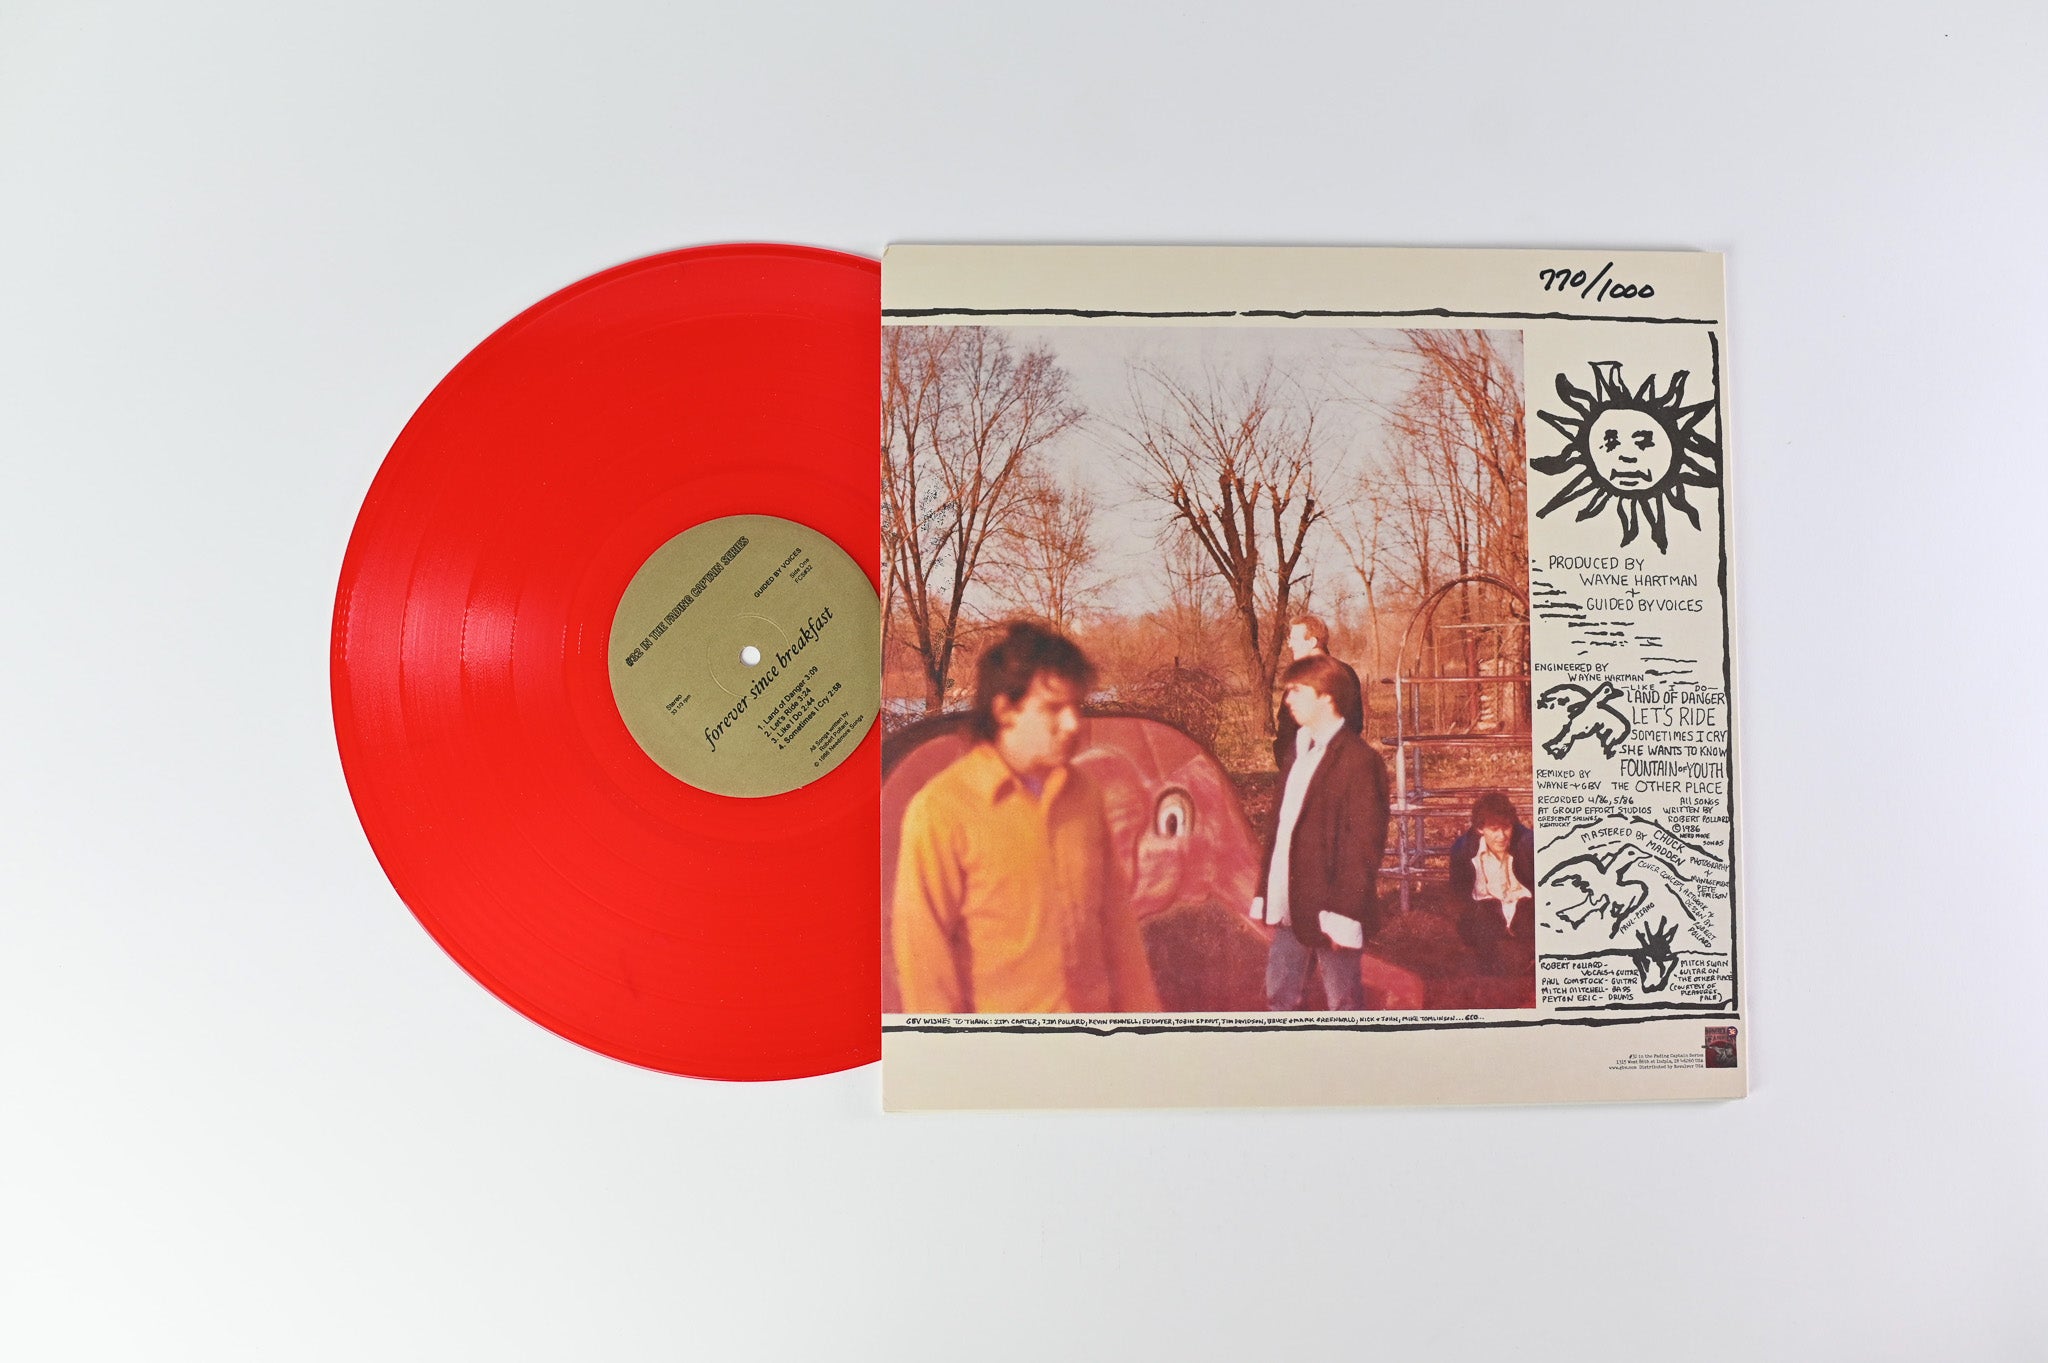 Guided By Voices - Forever Since Breakfast on Fading Captain Numbered Red Reissue